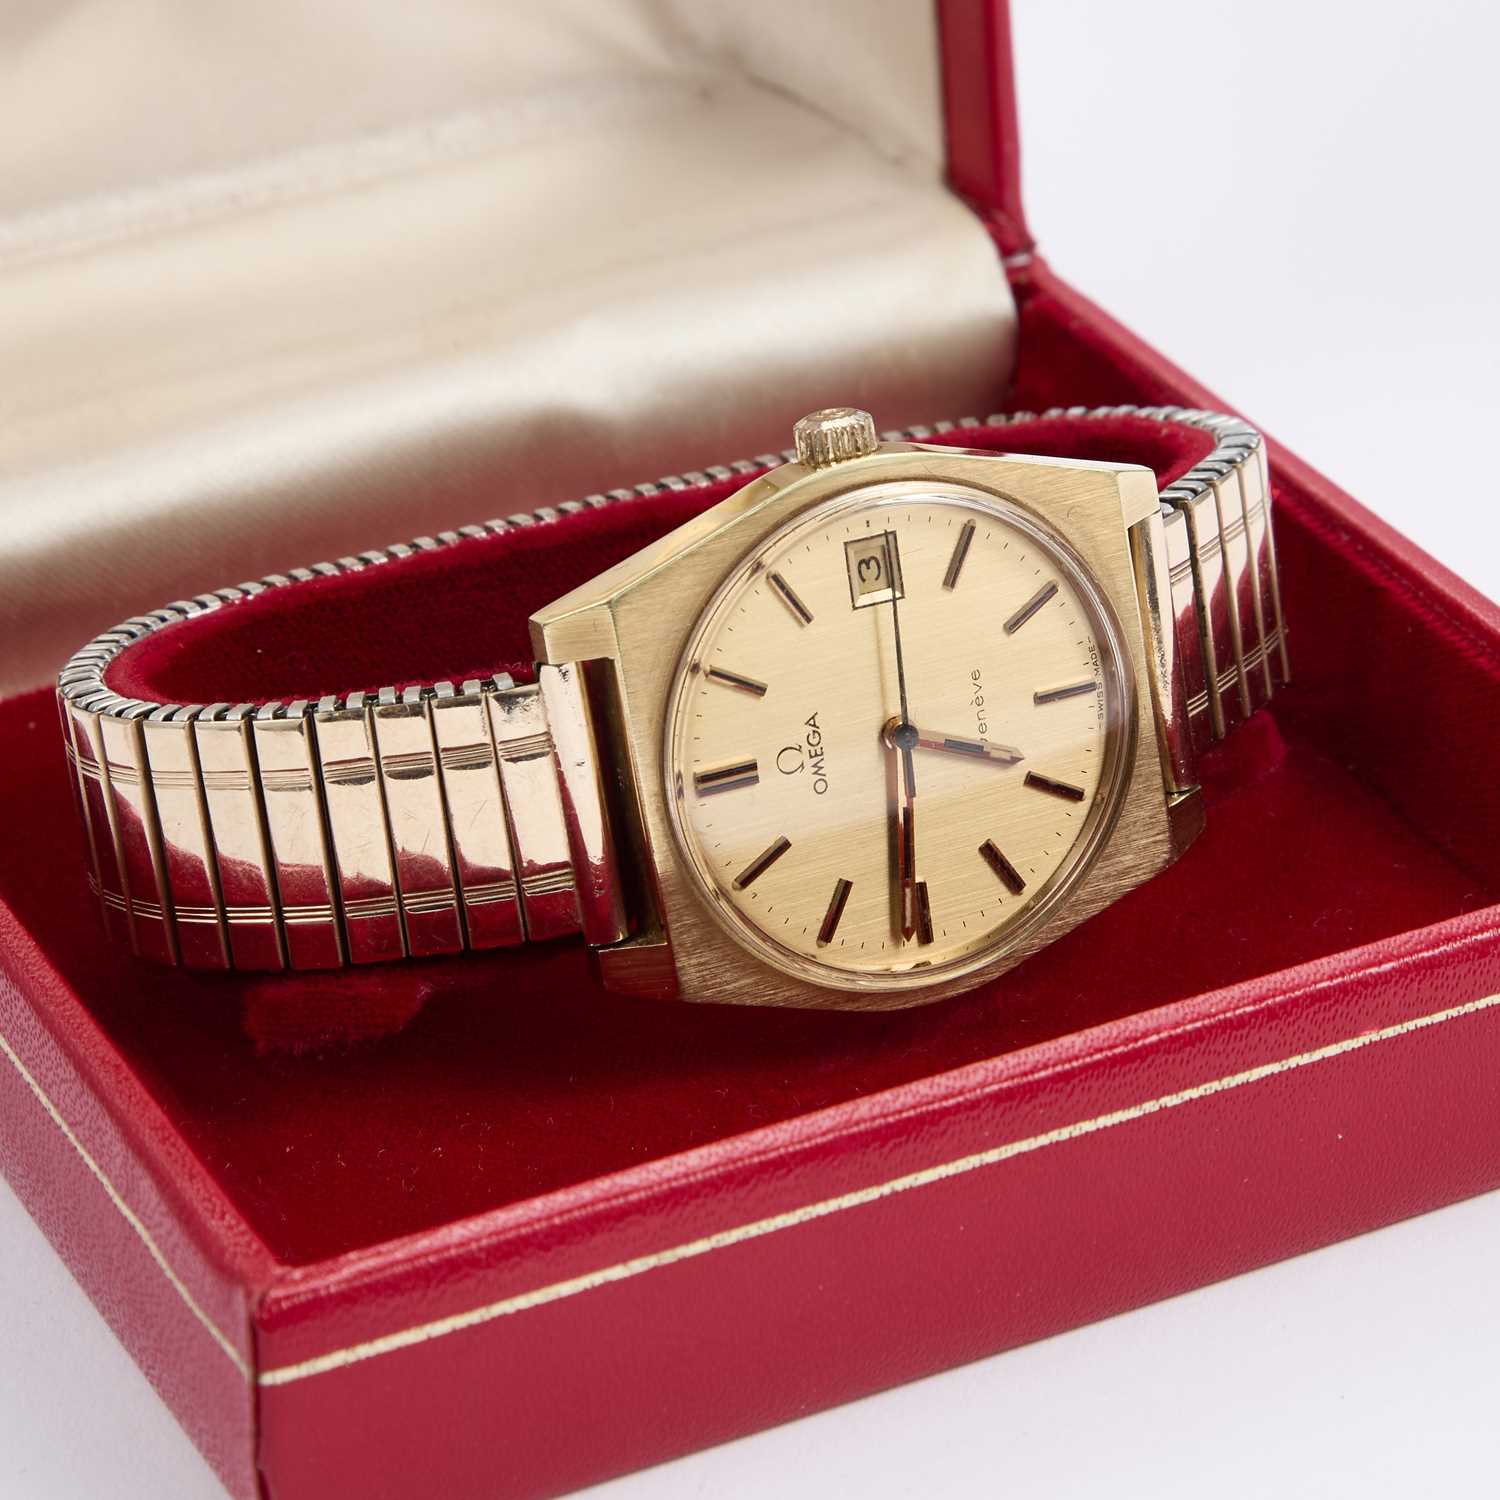 A GENTS GOLD PLATED OMEGA GENEVE WATCH - Image 2 of 2